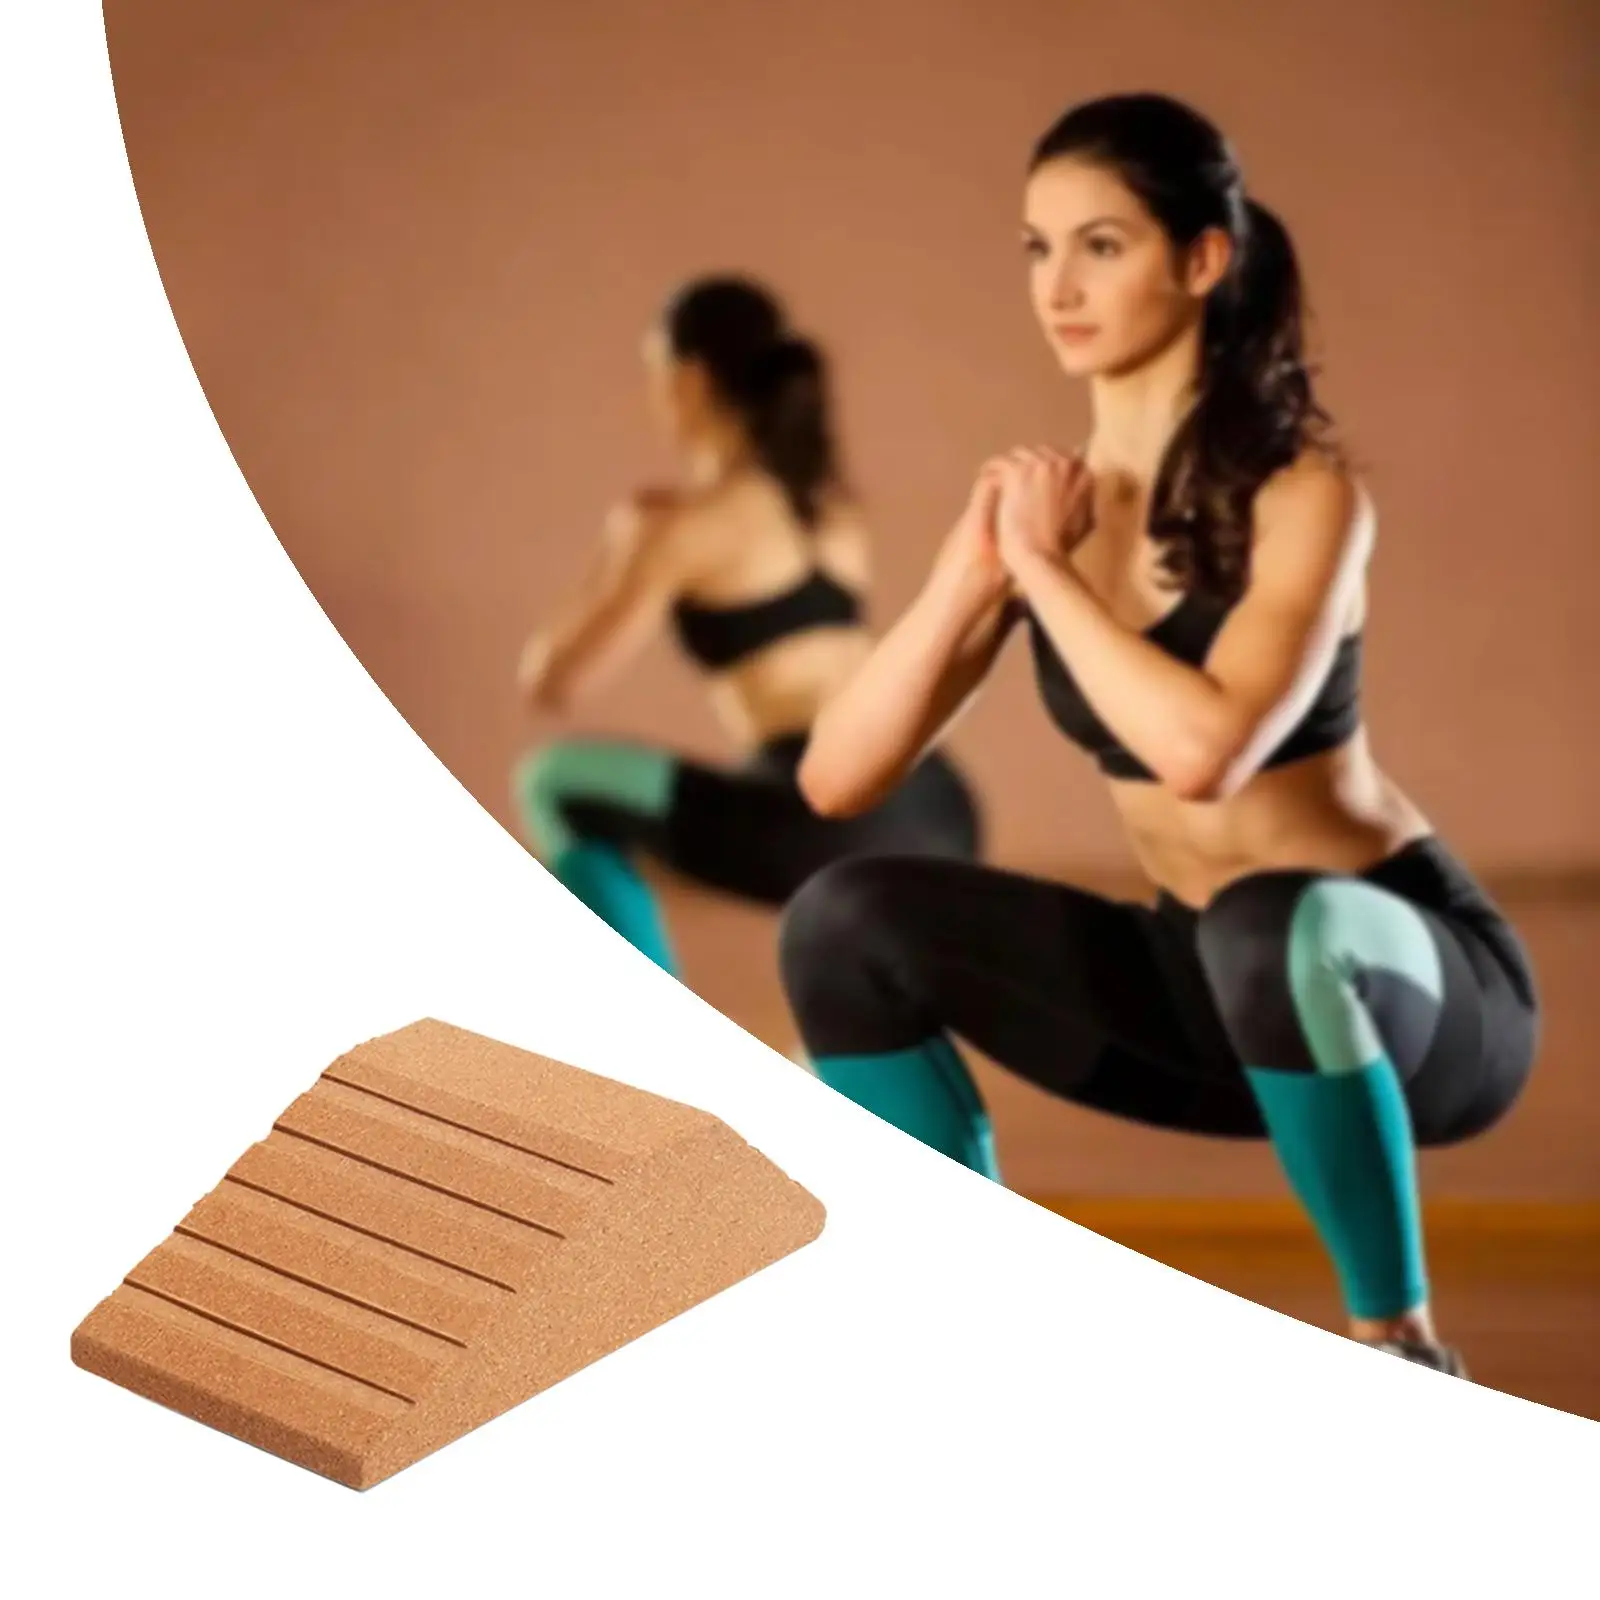 Cork Squat Wedge Block Prop Accessory Portable Durable Yoga Brick for Pilates Bodybuilding Exercise Weightlifting Indoor Sports